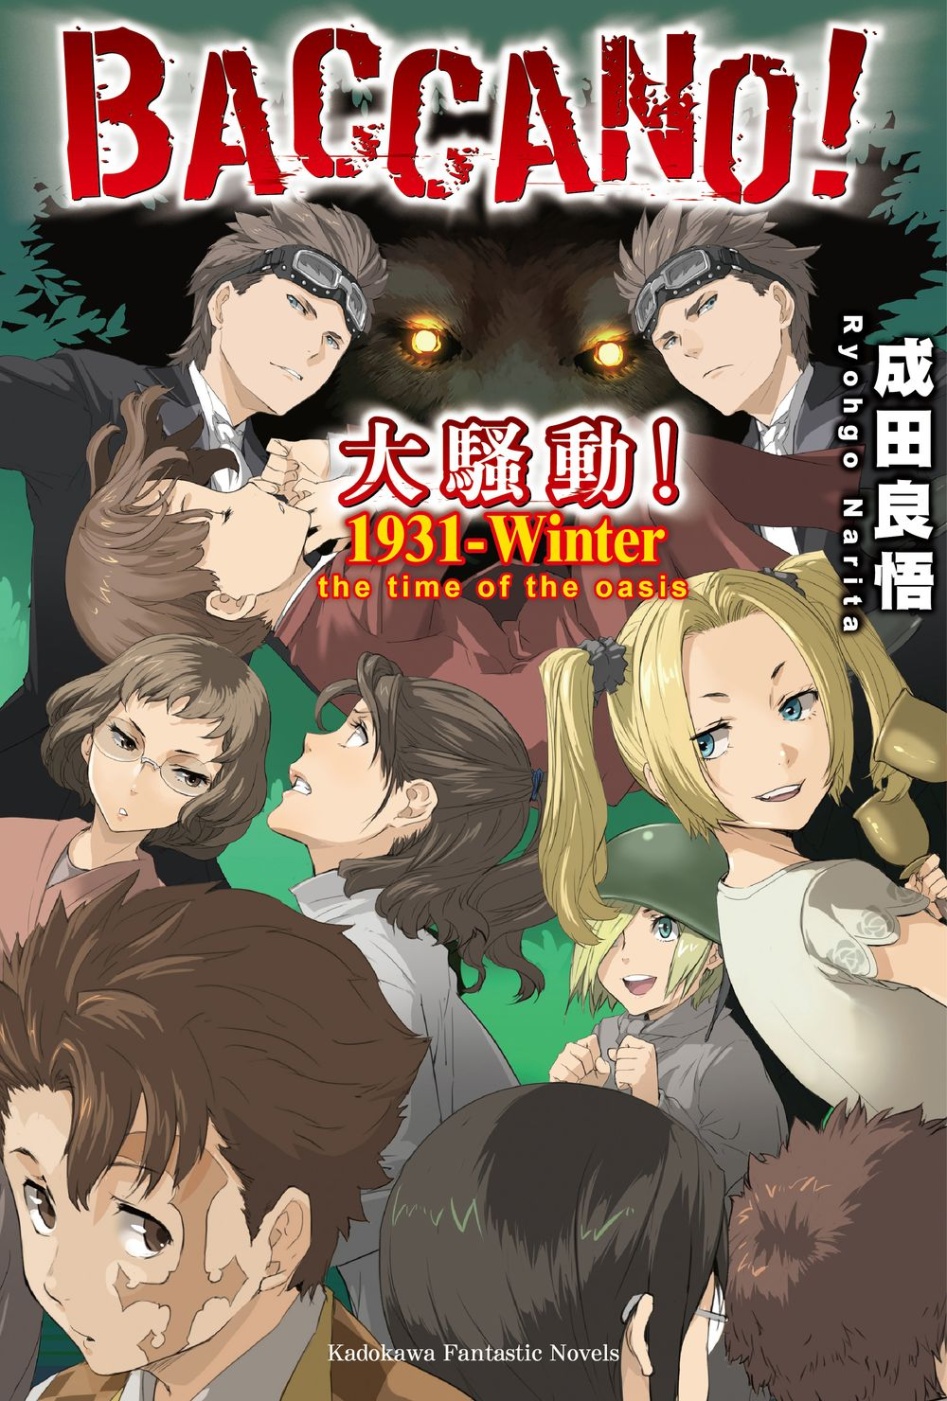 BACCANO！大騷動！ (20) 1931-Winter the time of the oasis